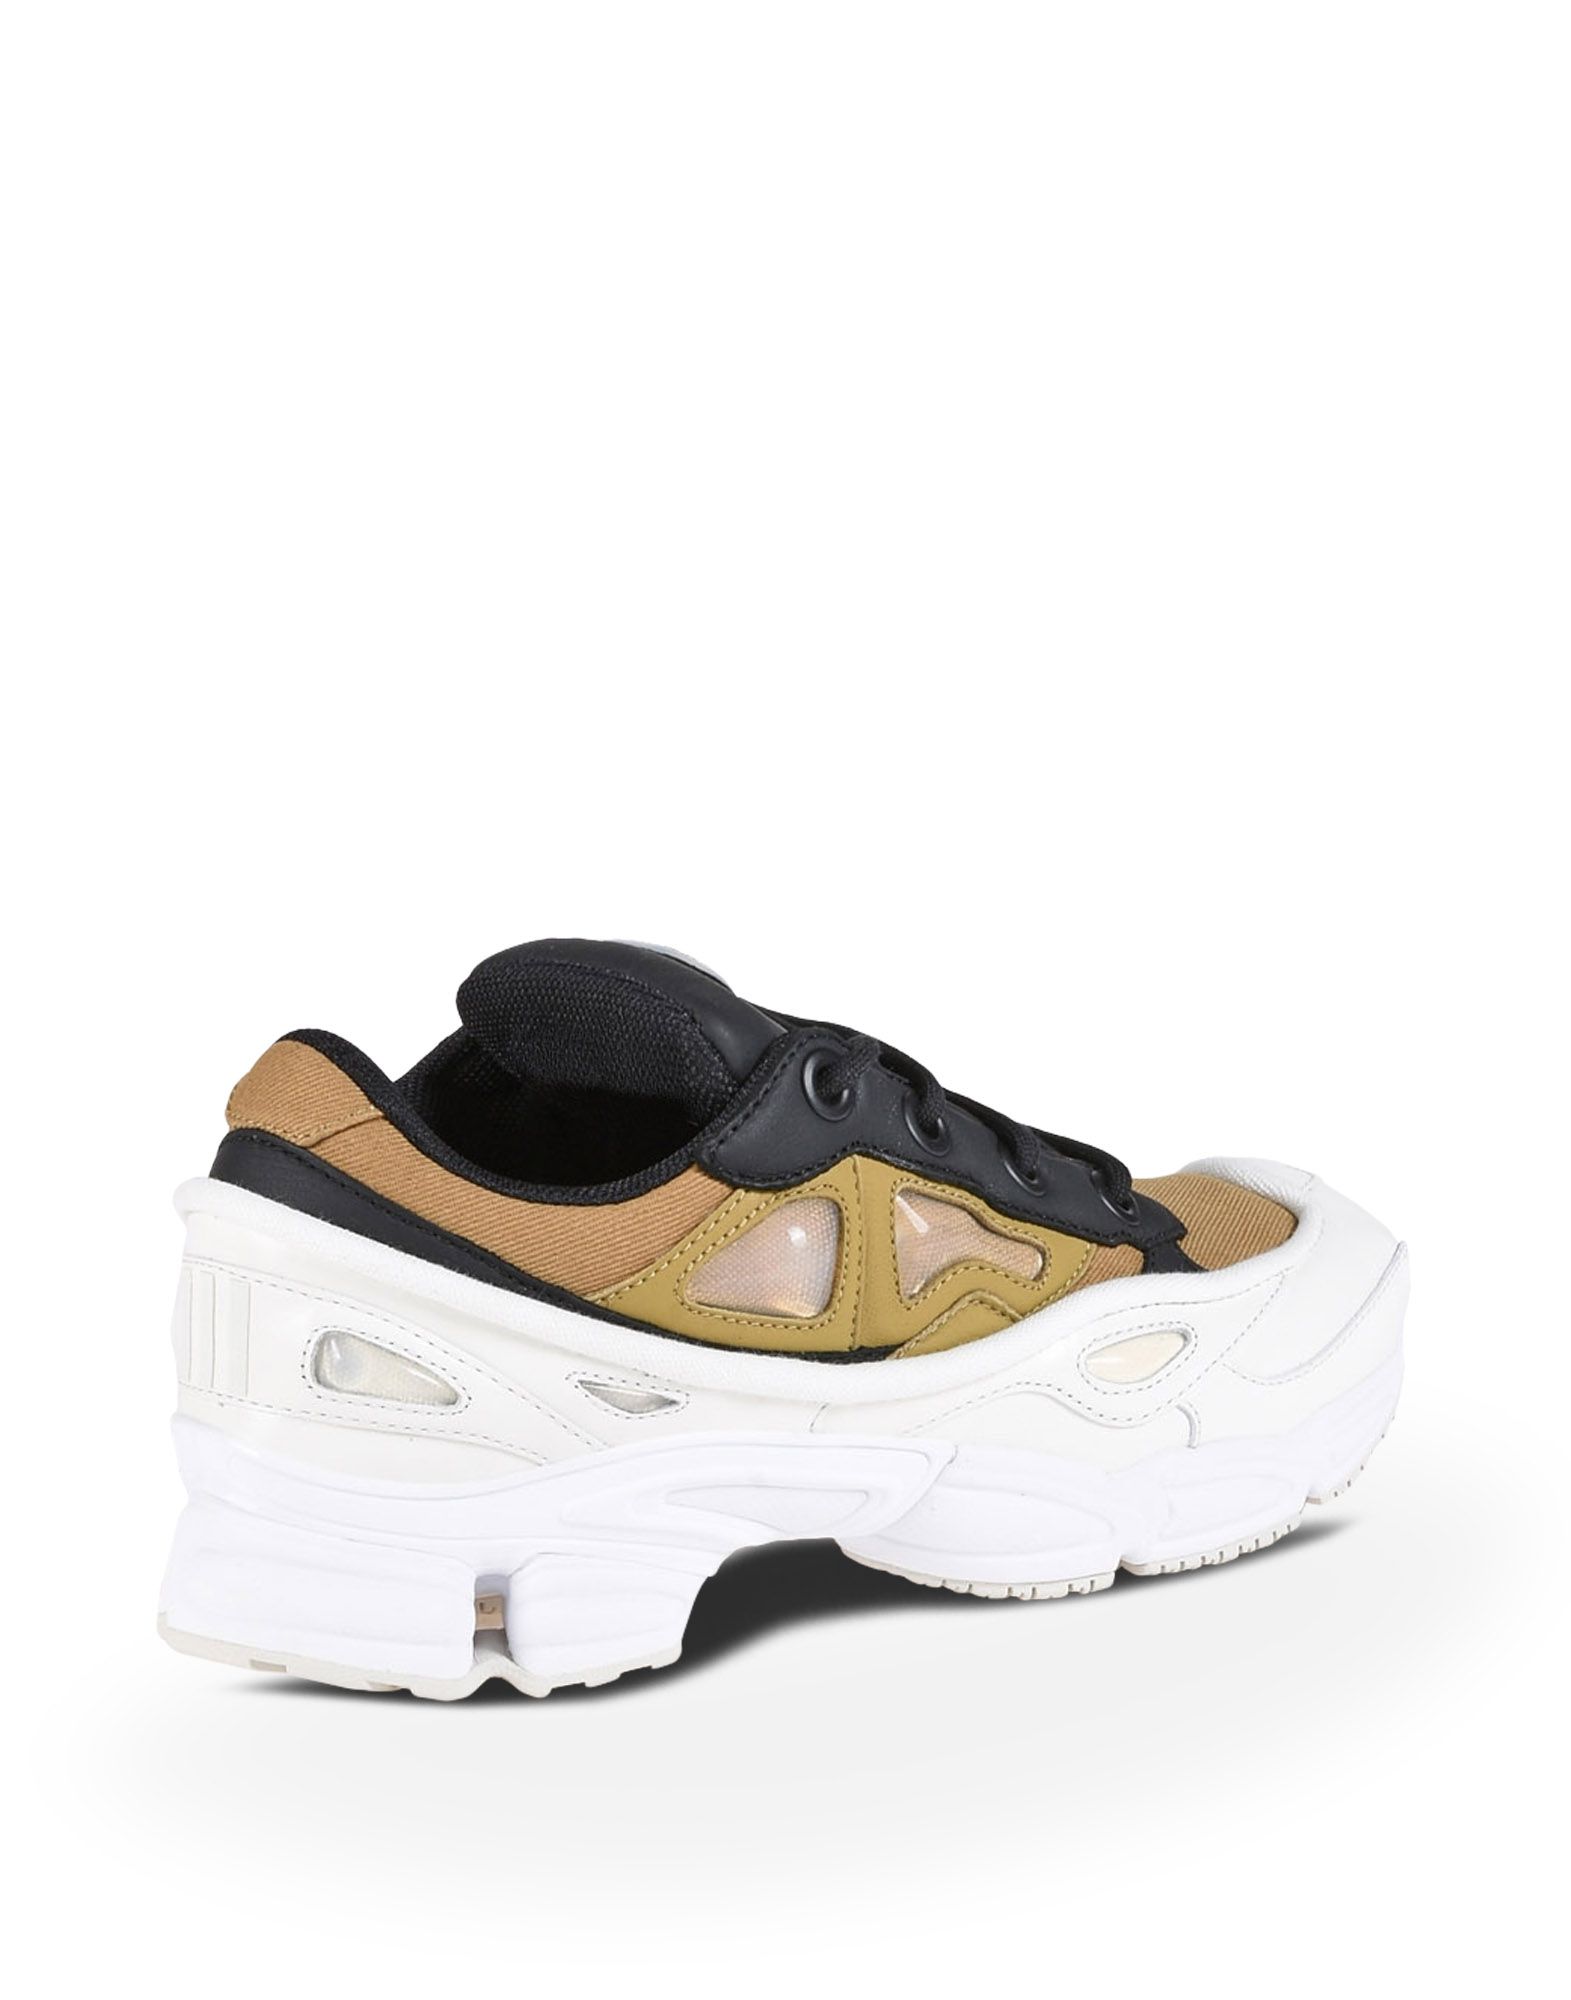 Raf Simons Ozweego III Trainers | Adidas Y-3 Official Store